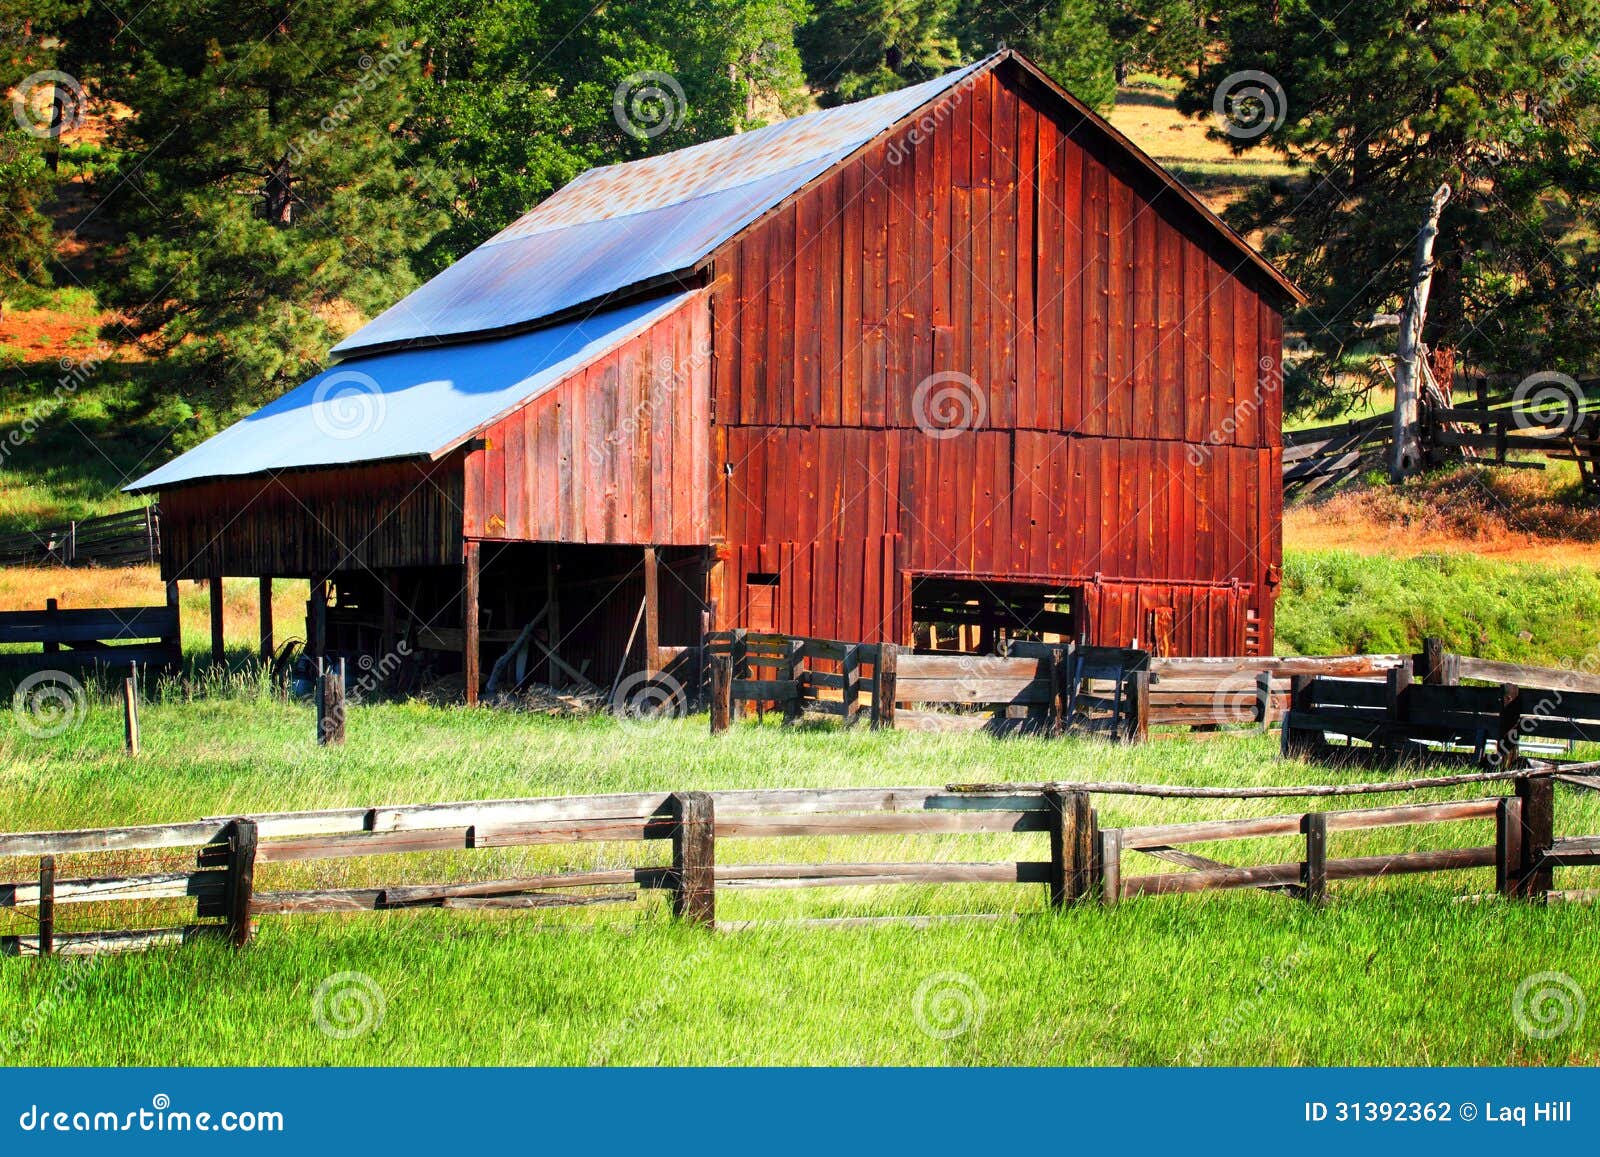 typical rustic old working barn